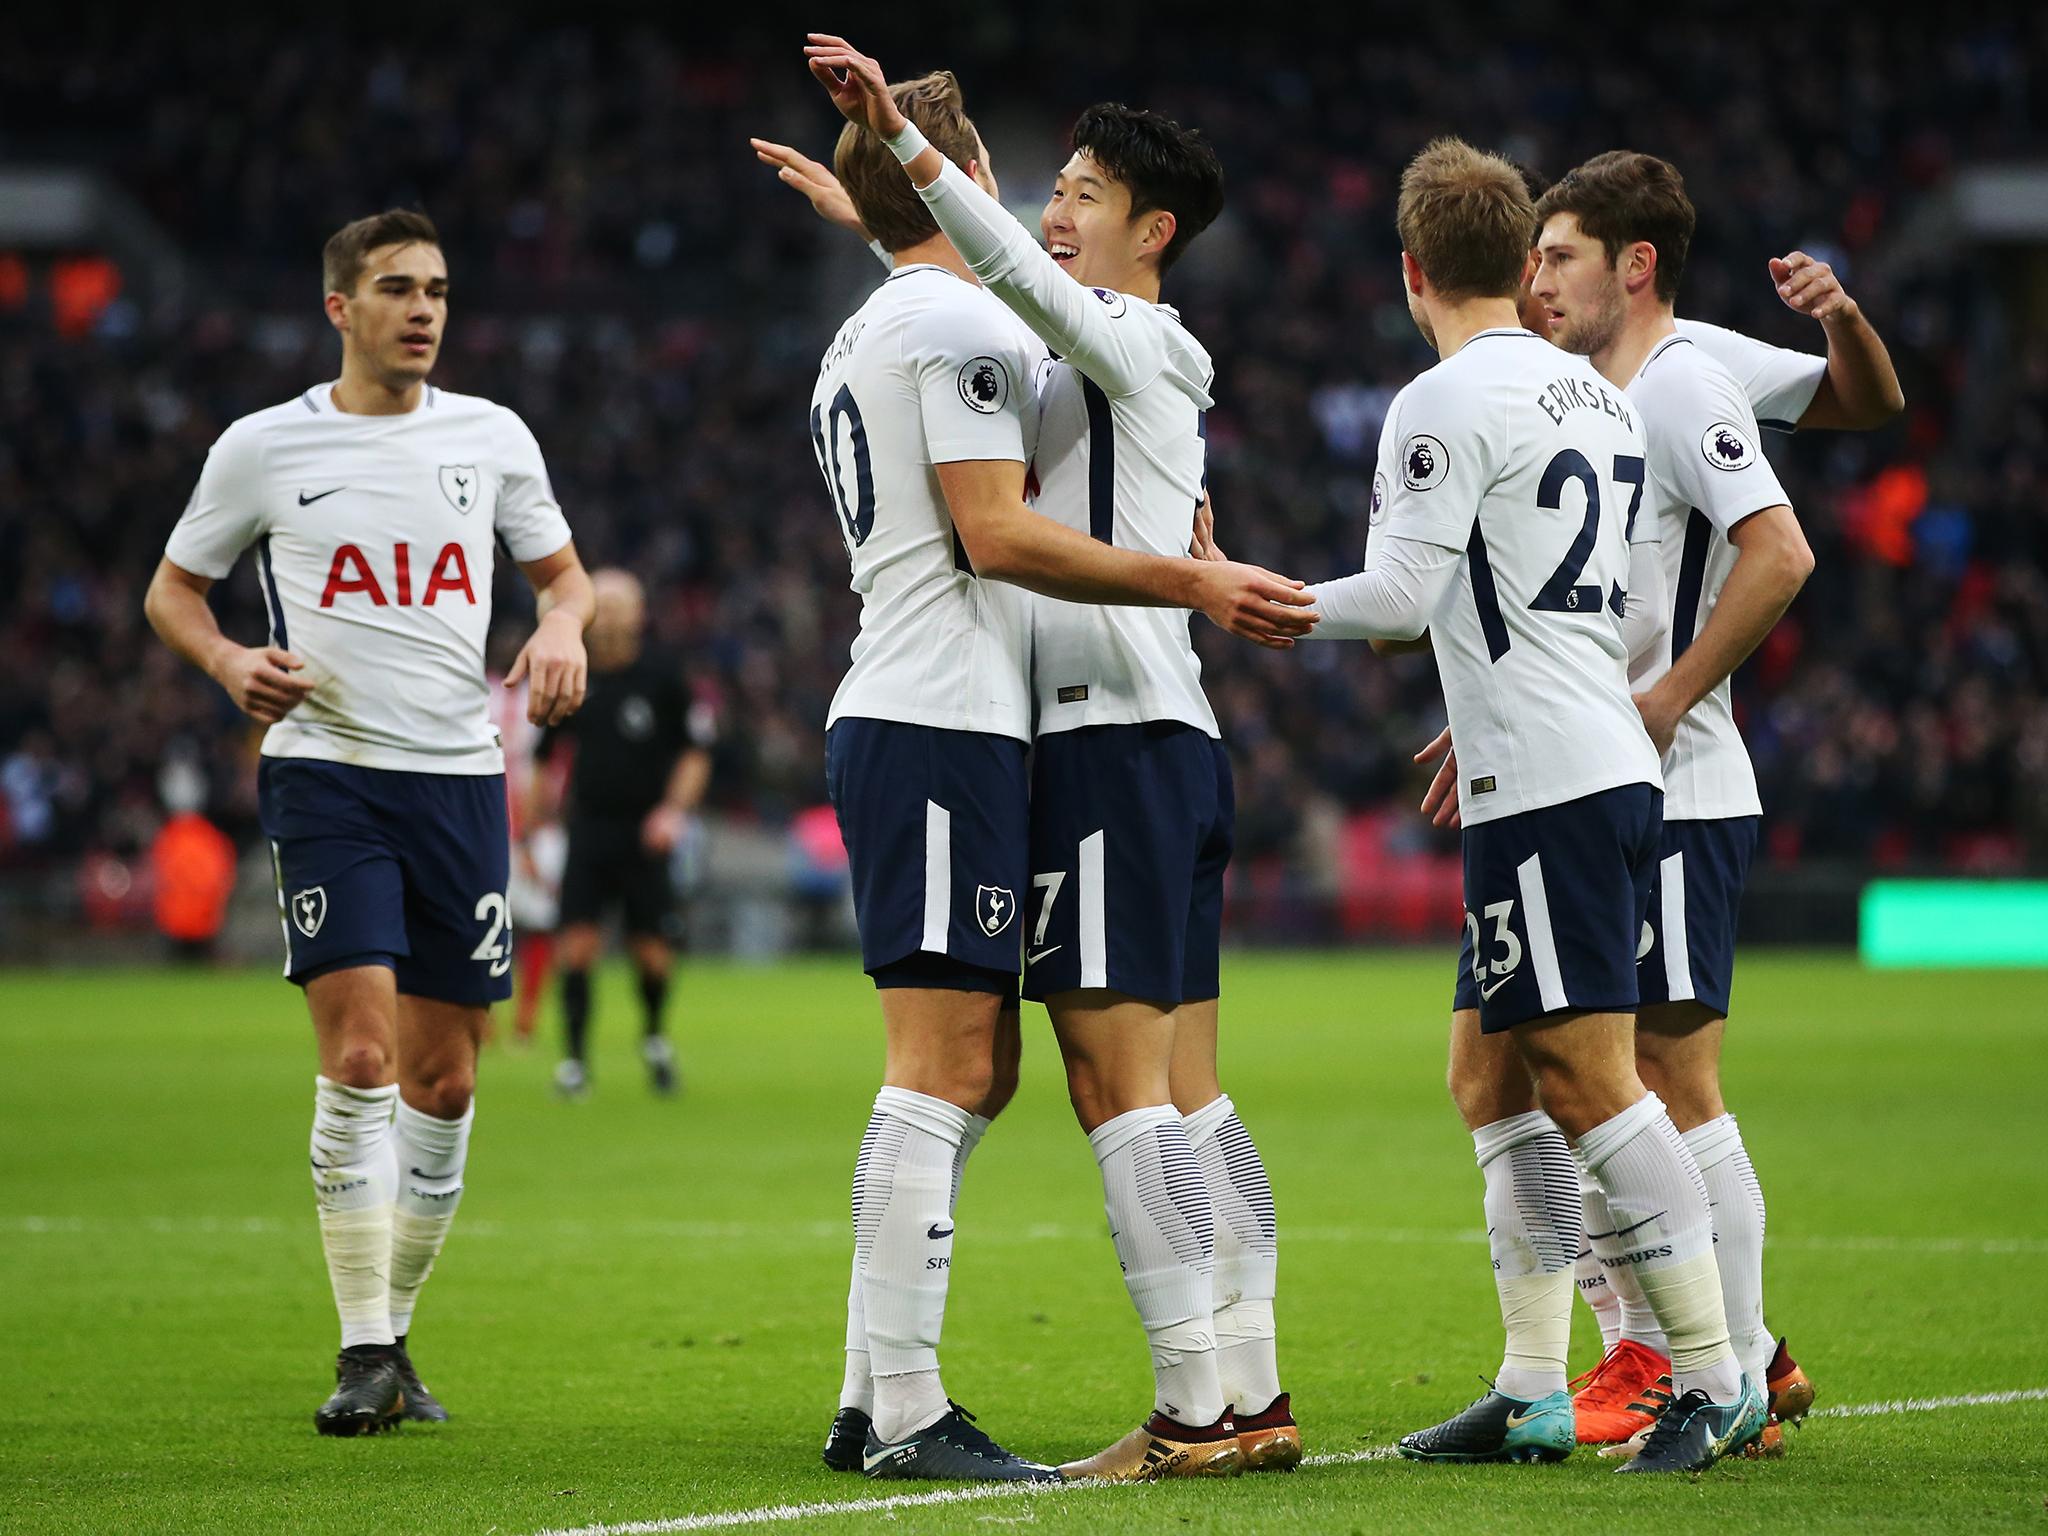 Tottenham have the firepower to hurt City's weak points